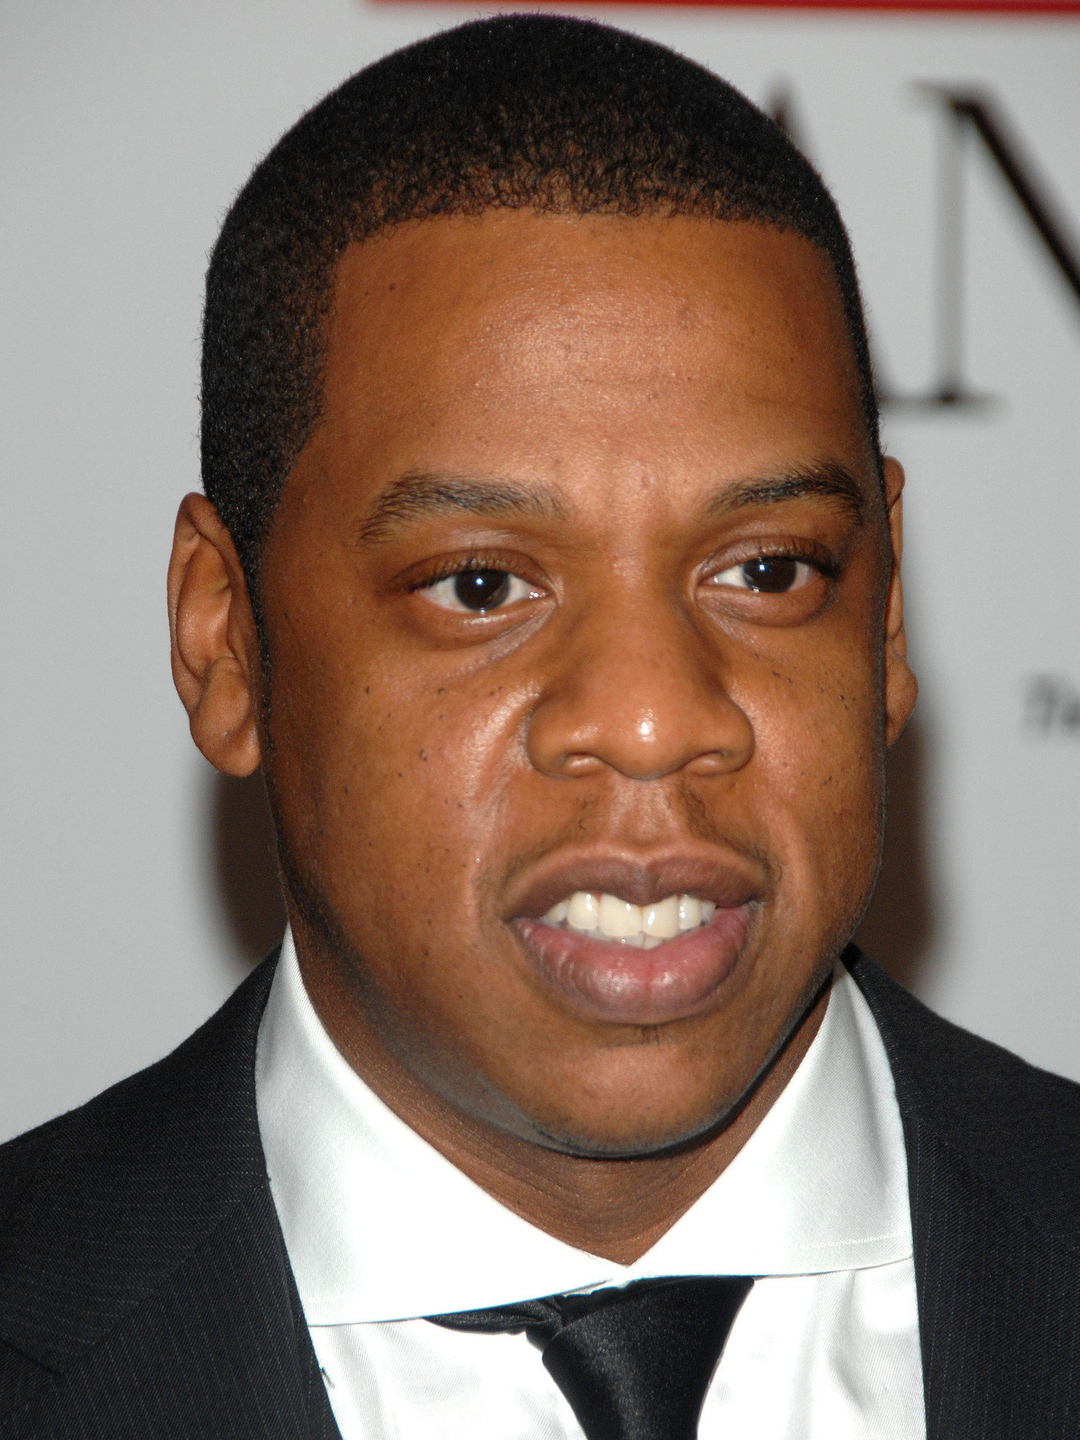 Jay-Z who is his father